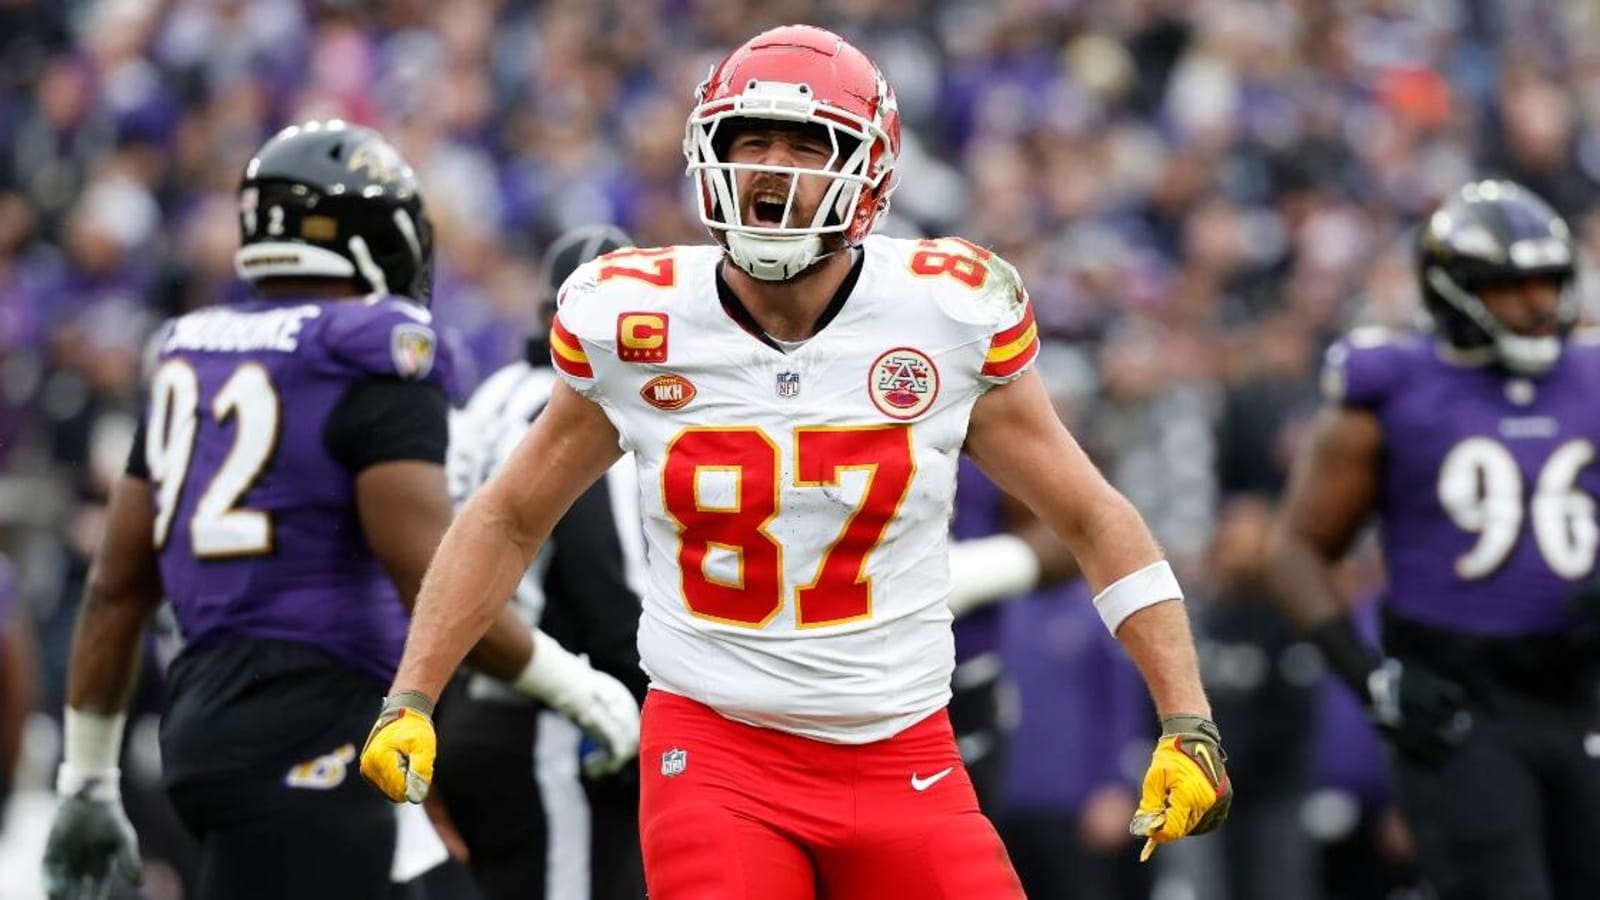 Travis Kelce on passing Jerry Rice: ‘Shoutout to Jerry Rice, the Chiefs are still the Chiefs’